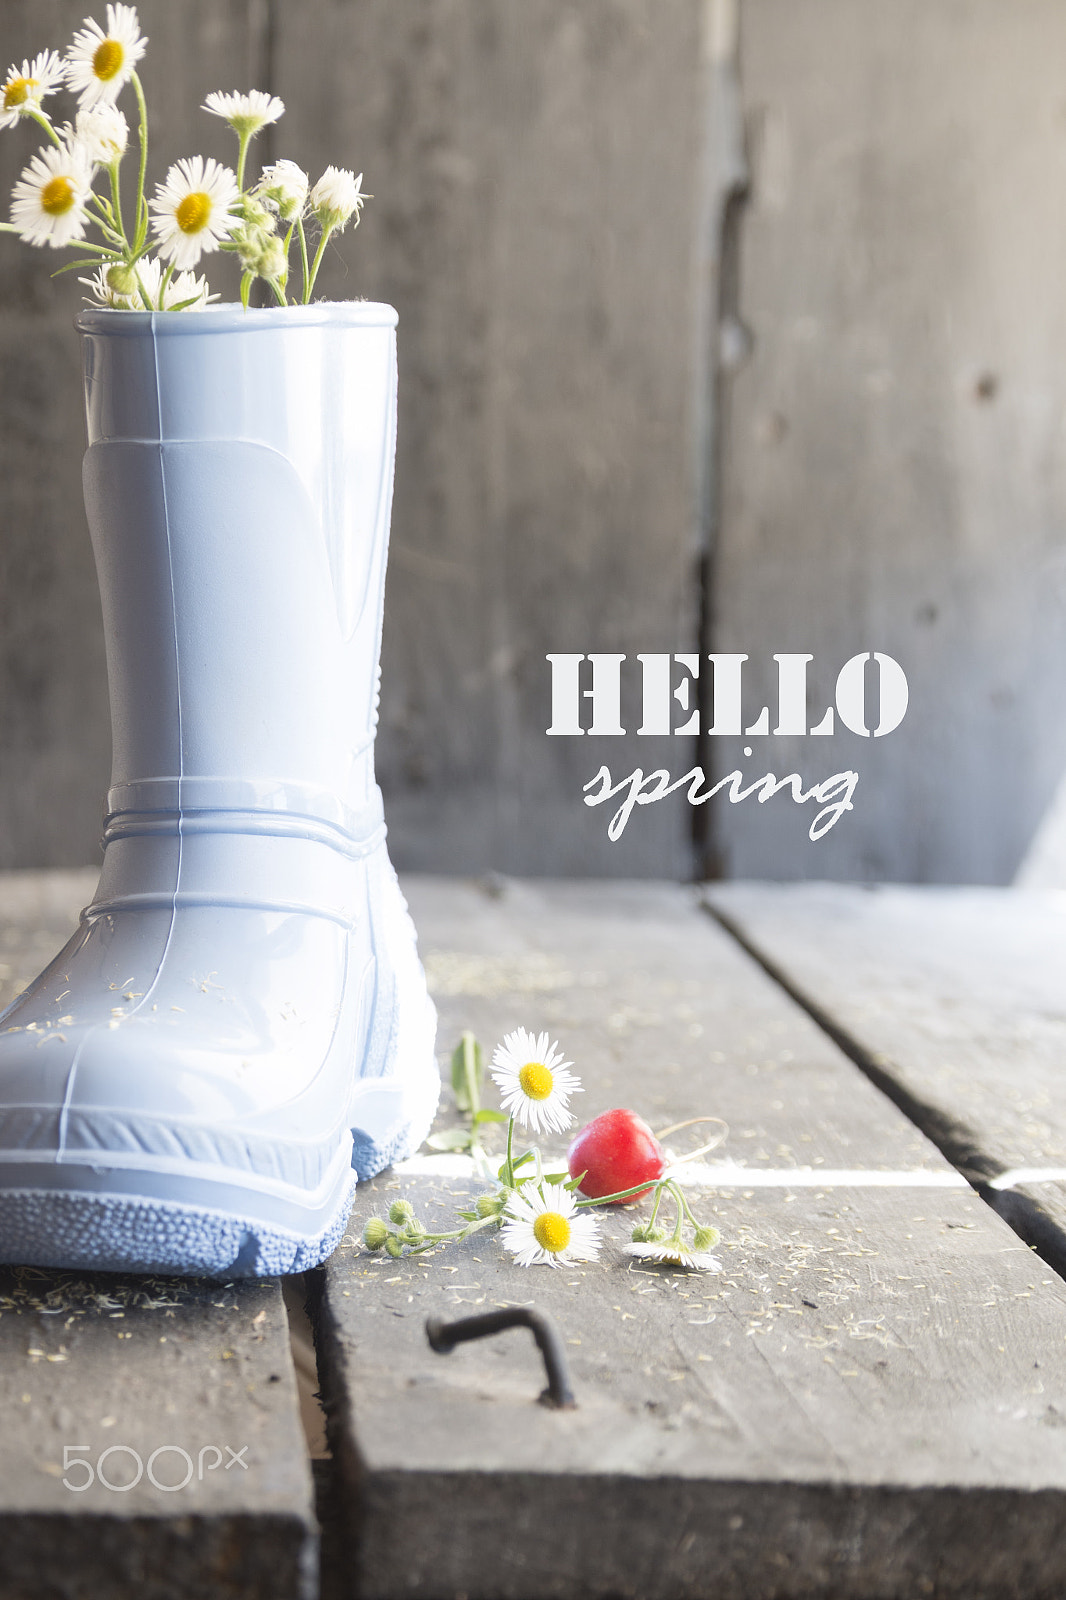 Canon EOS 70D + Sigma 18-200mm f/3.5-6.3 DC OS sample photo. Hello spring text, daisy and boots on a vintage table, photography